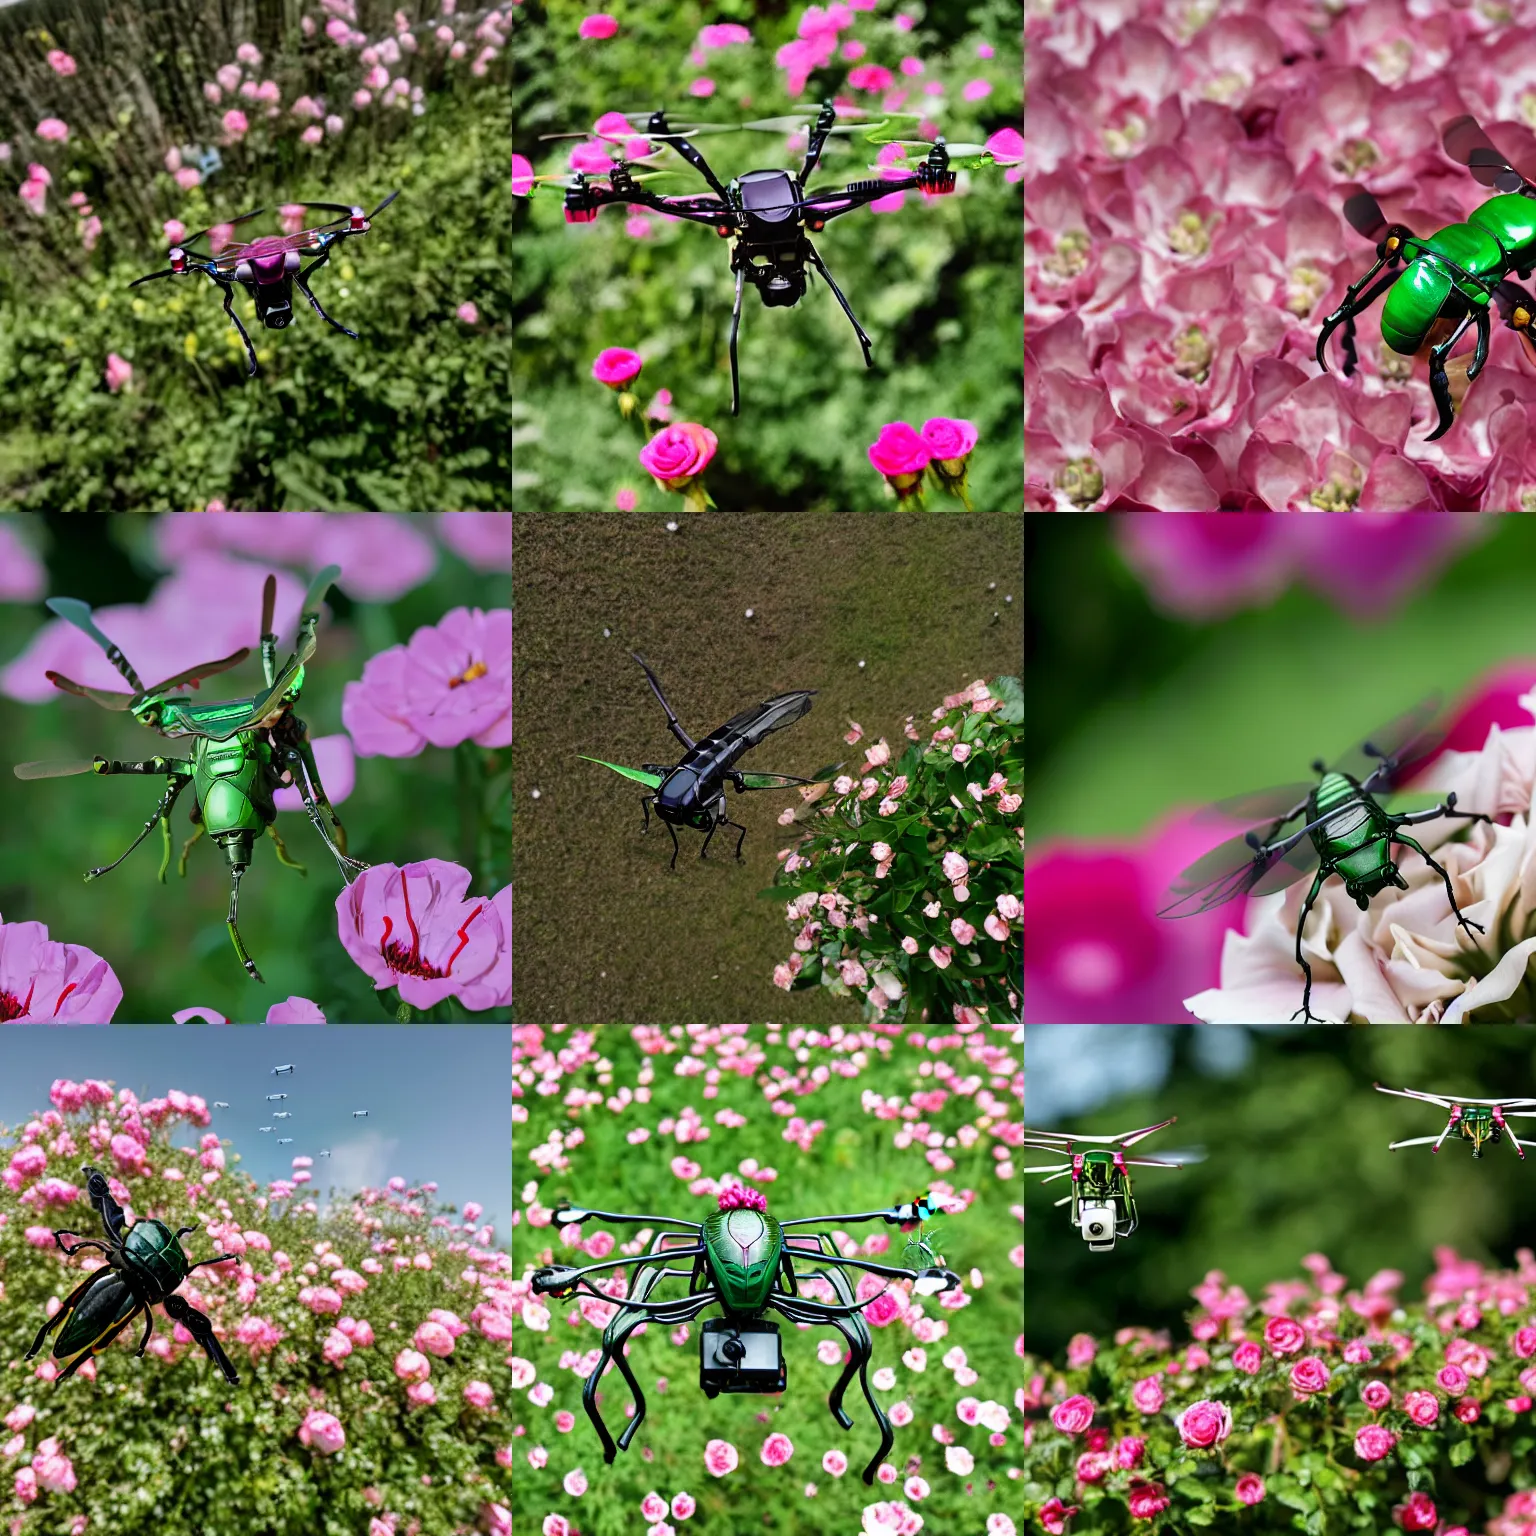 Prompt: rose chafer with quadcopter drone wings creating turbulence above rose flowers